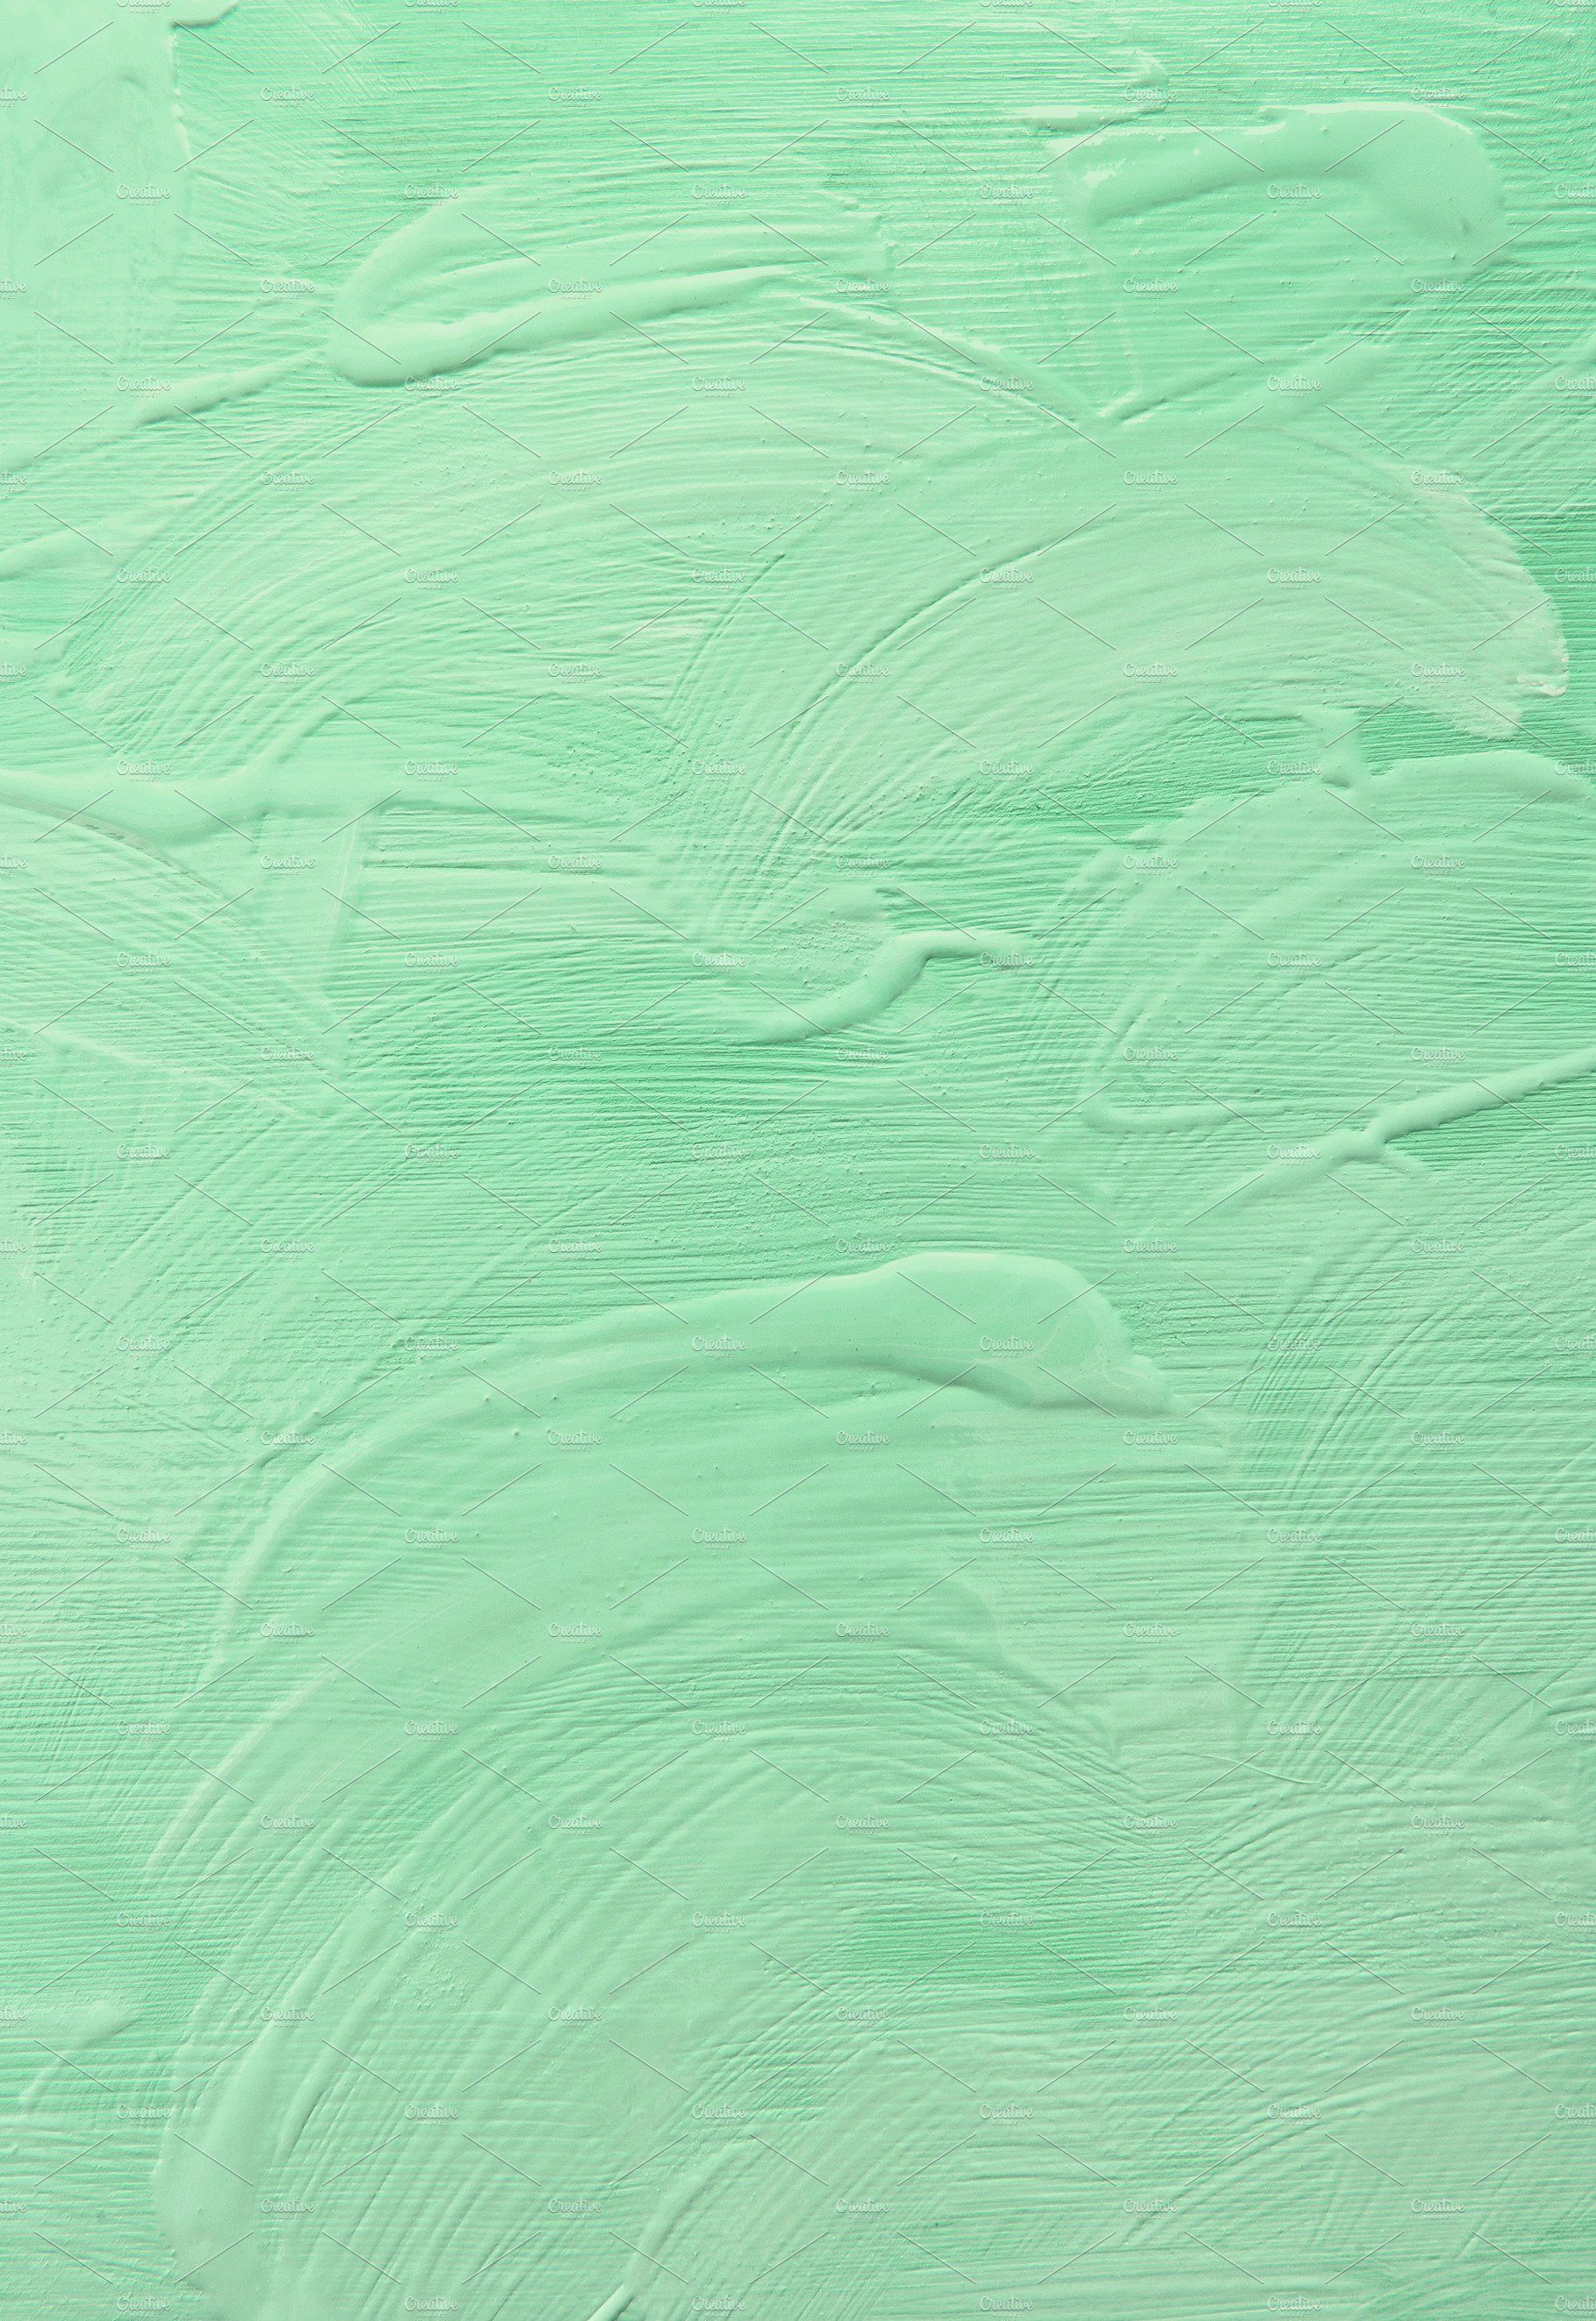 Green Pastel Aesthetic Wallpapers - Wallpaper Cave